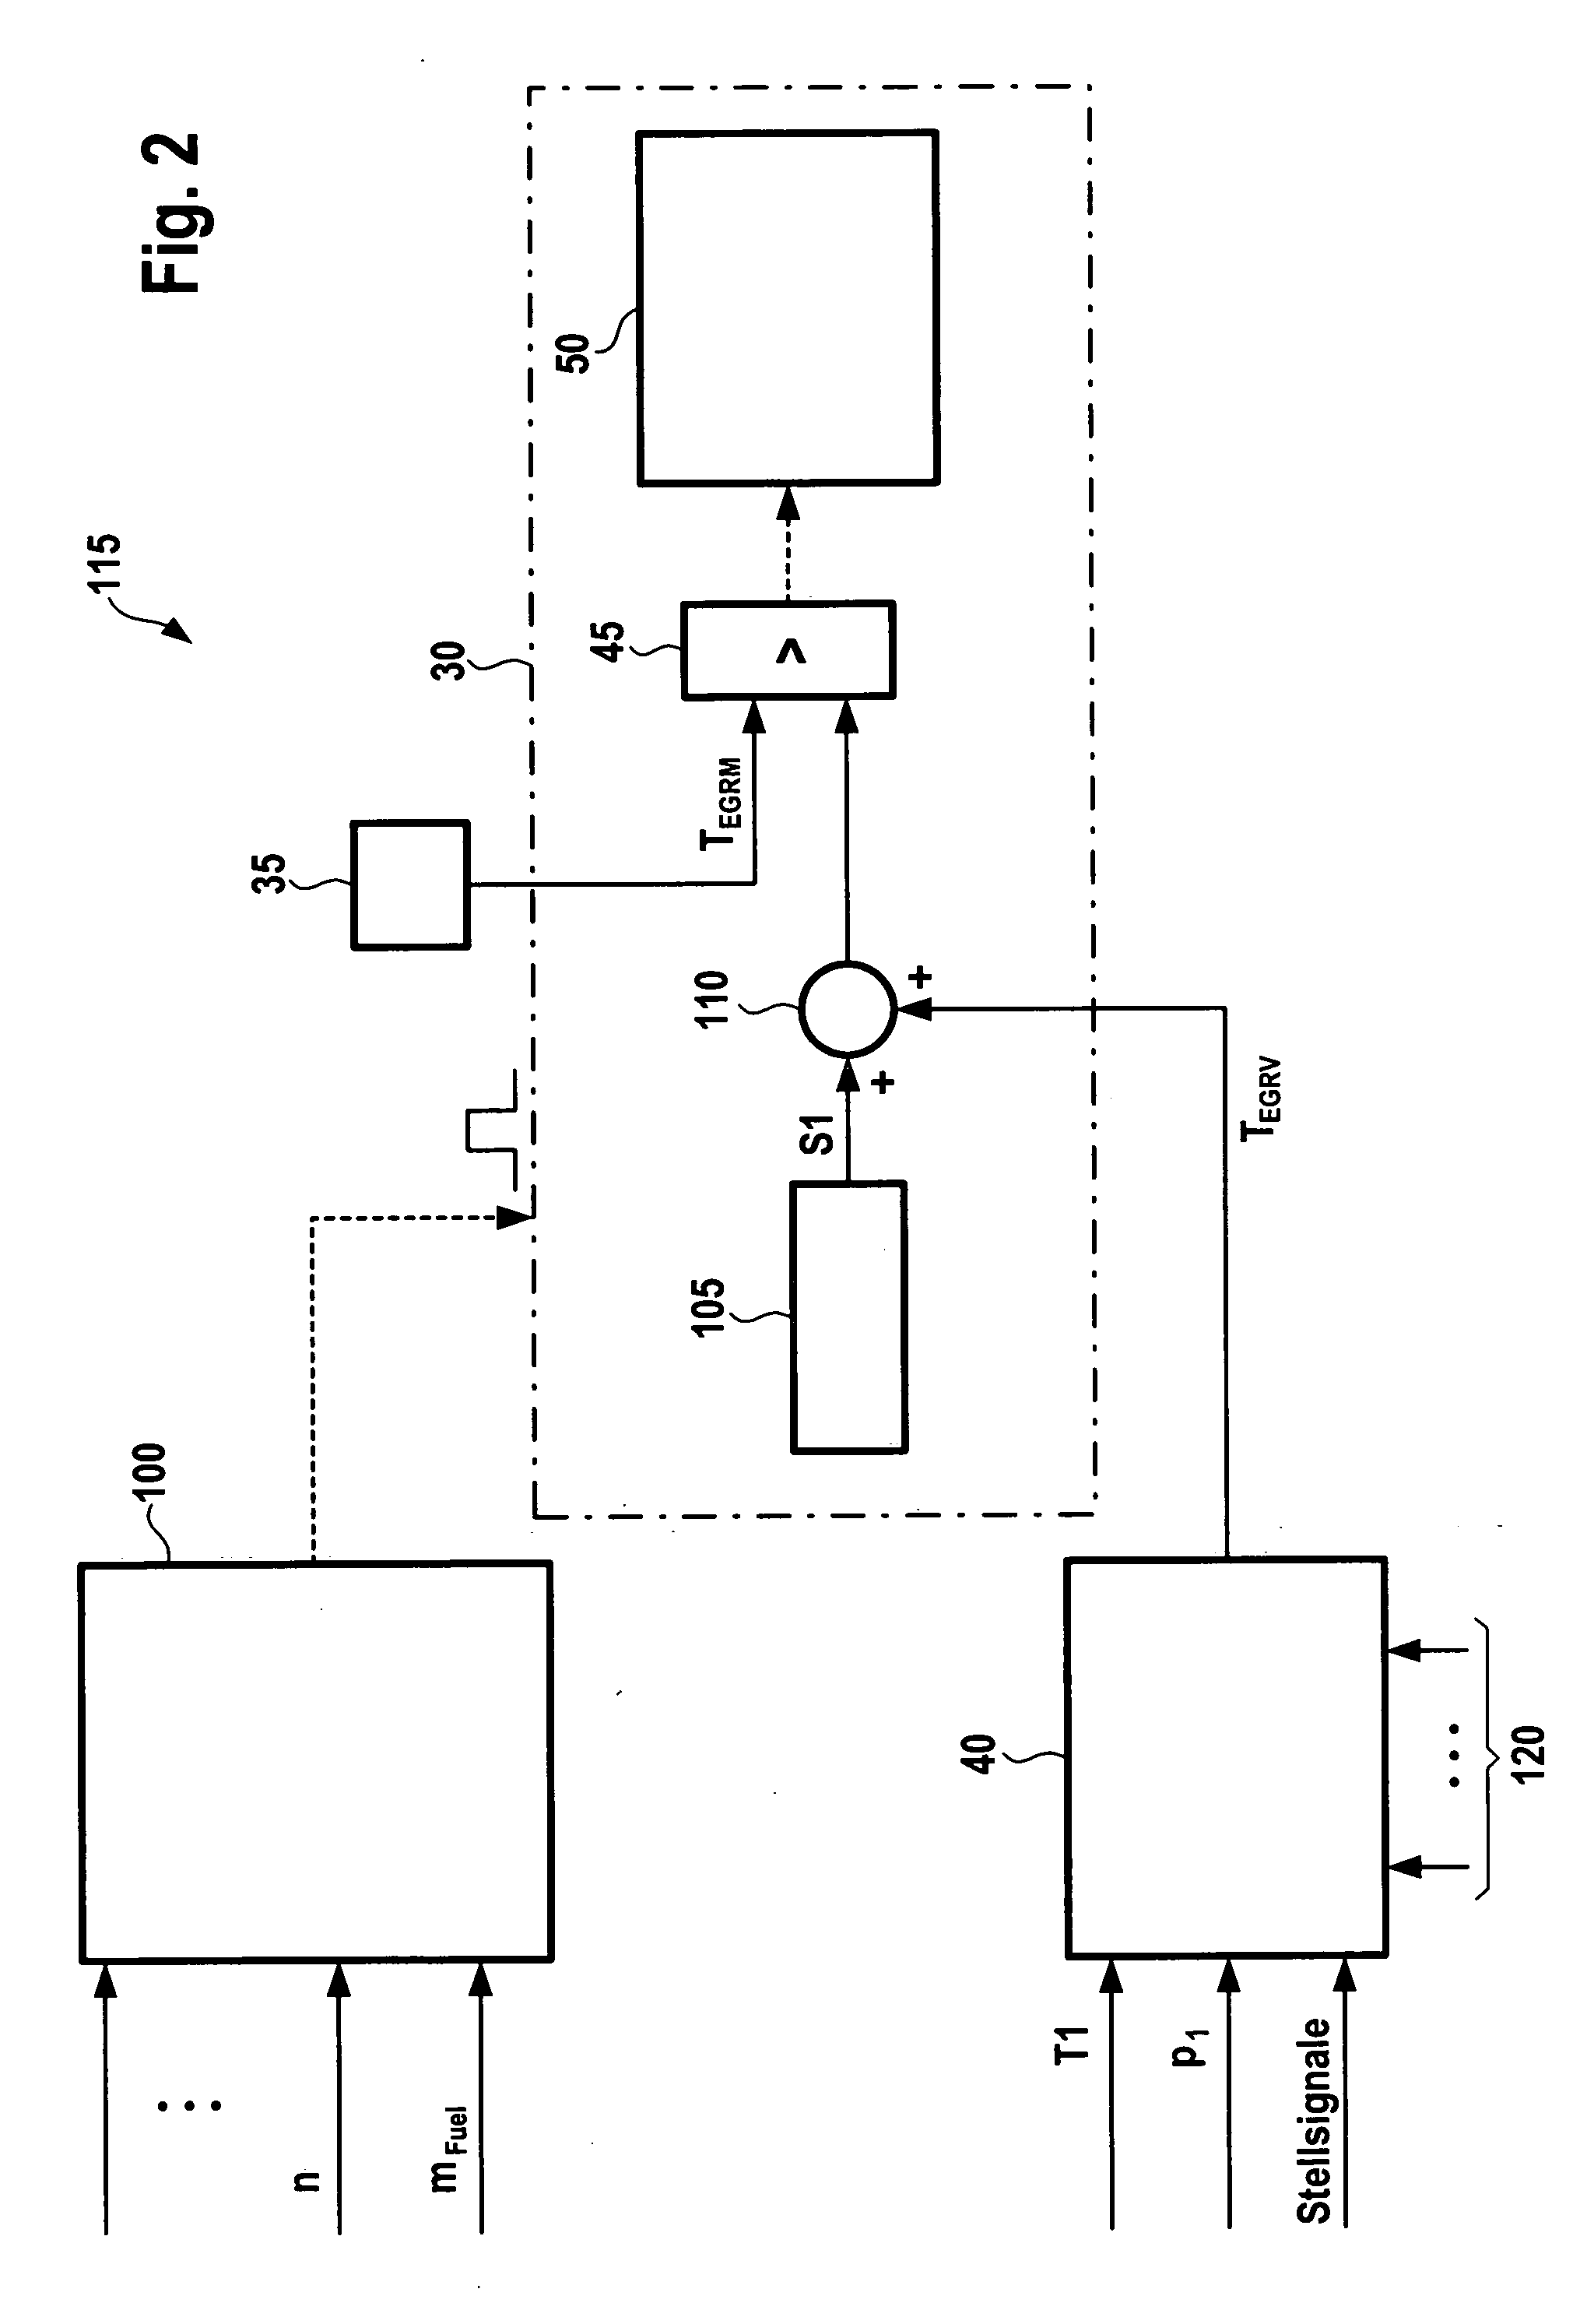 Method and device for operating an internal combustion engine having exhaust-gas recirculation